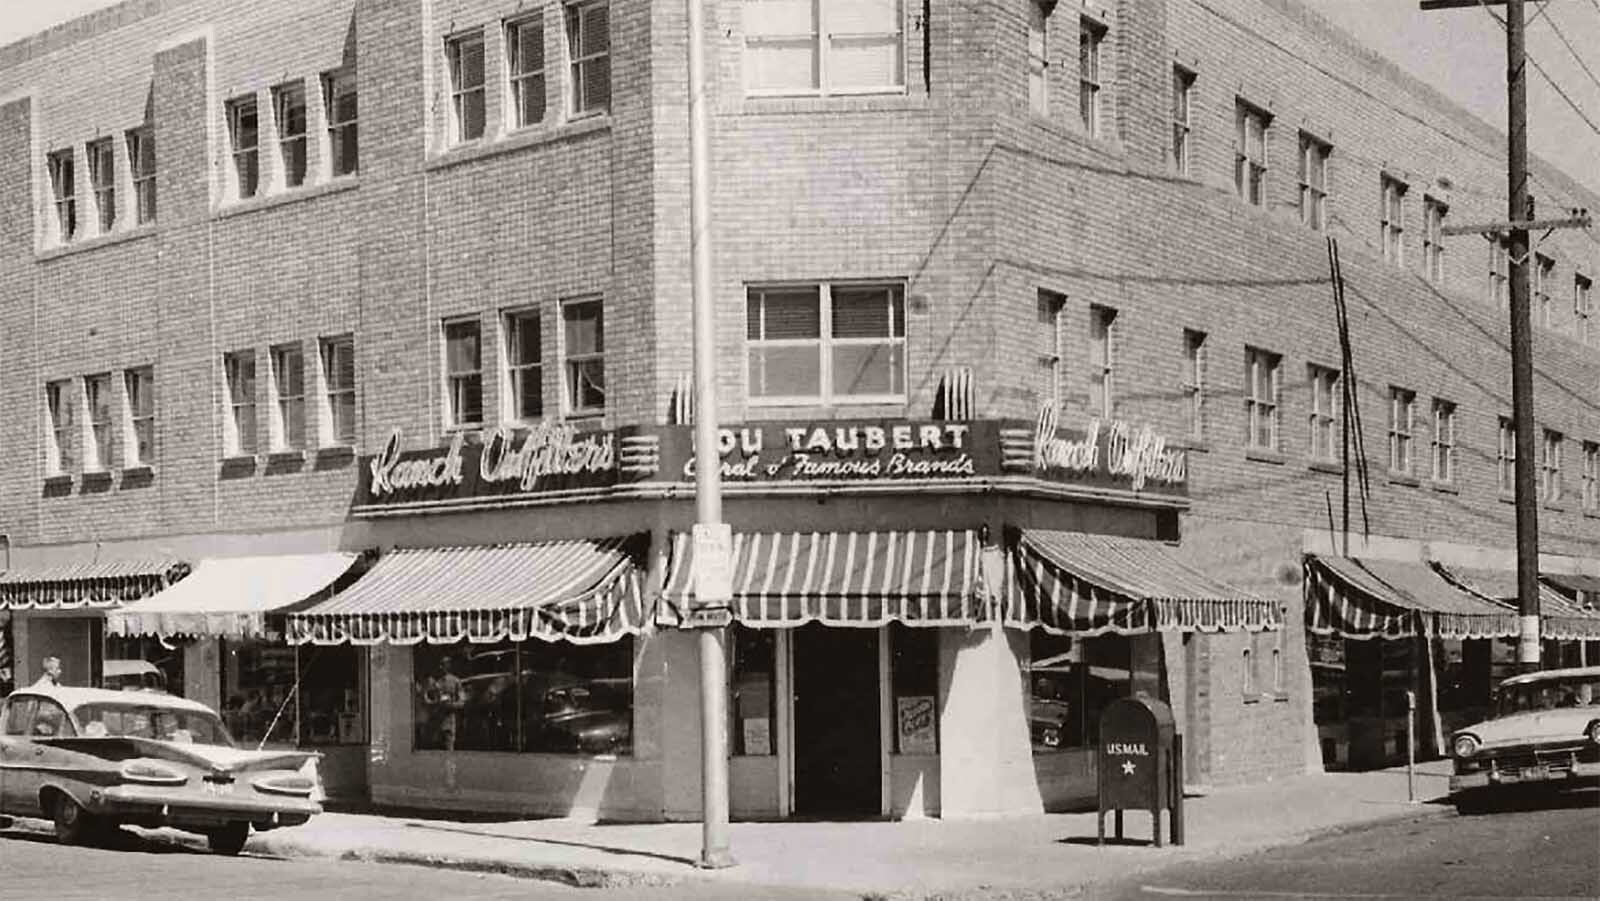 Iconic Western wear retailer Lou Taubert Ranch Outfitters opened in its downtown Casper location in 1947.